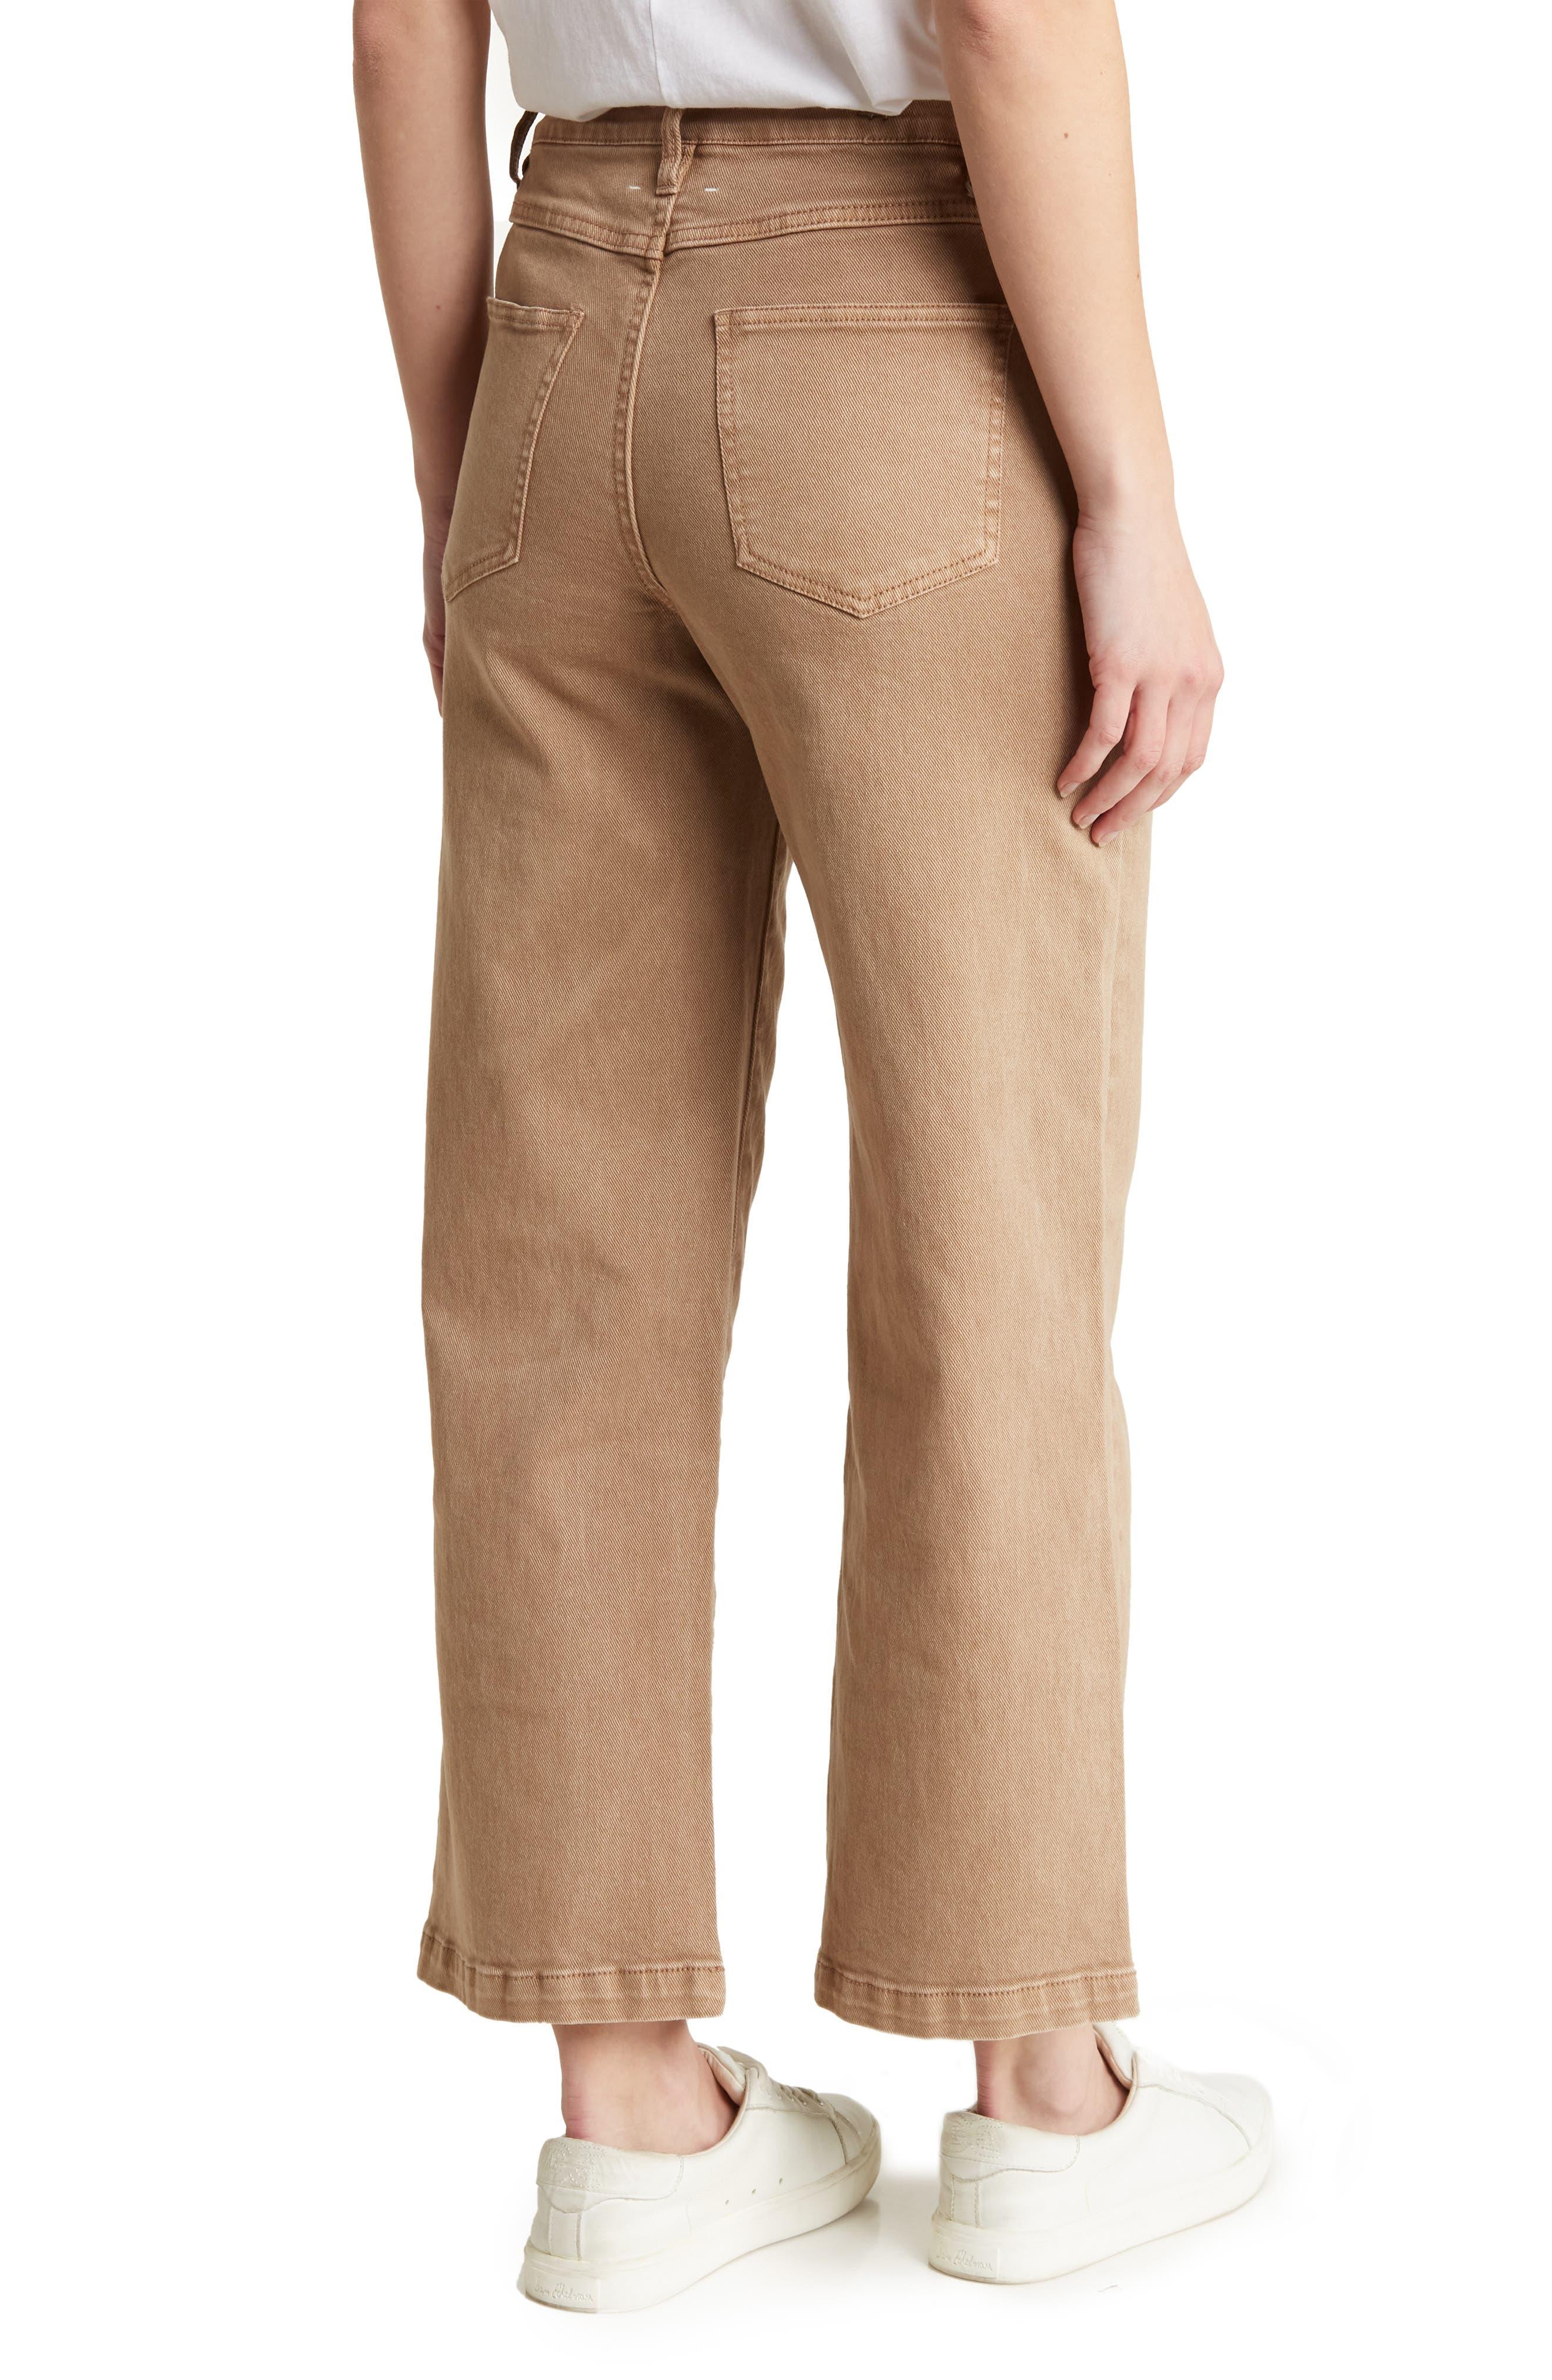 Habitual Angled Yoke Belted Jeans in Natural | Lyst